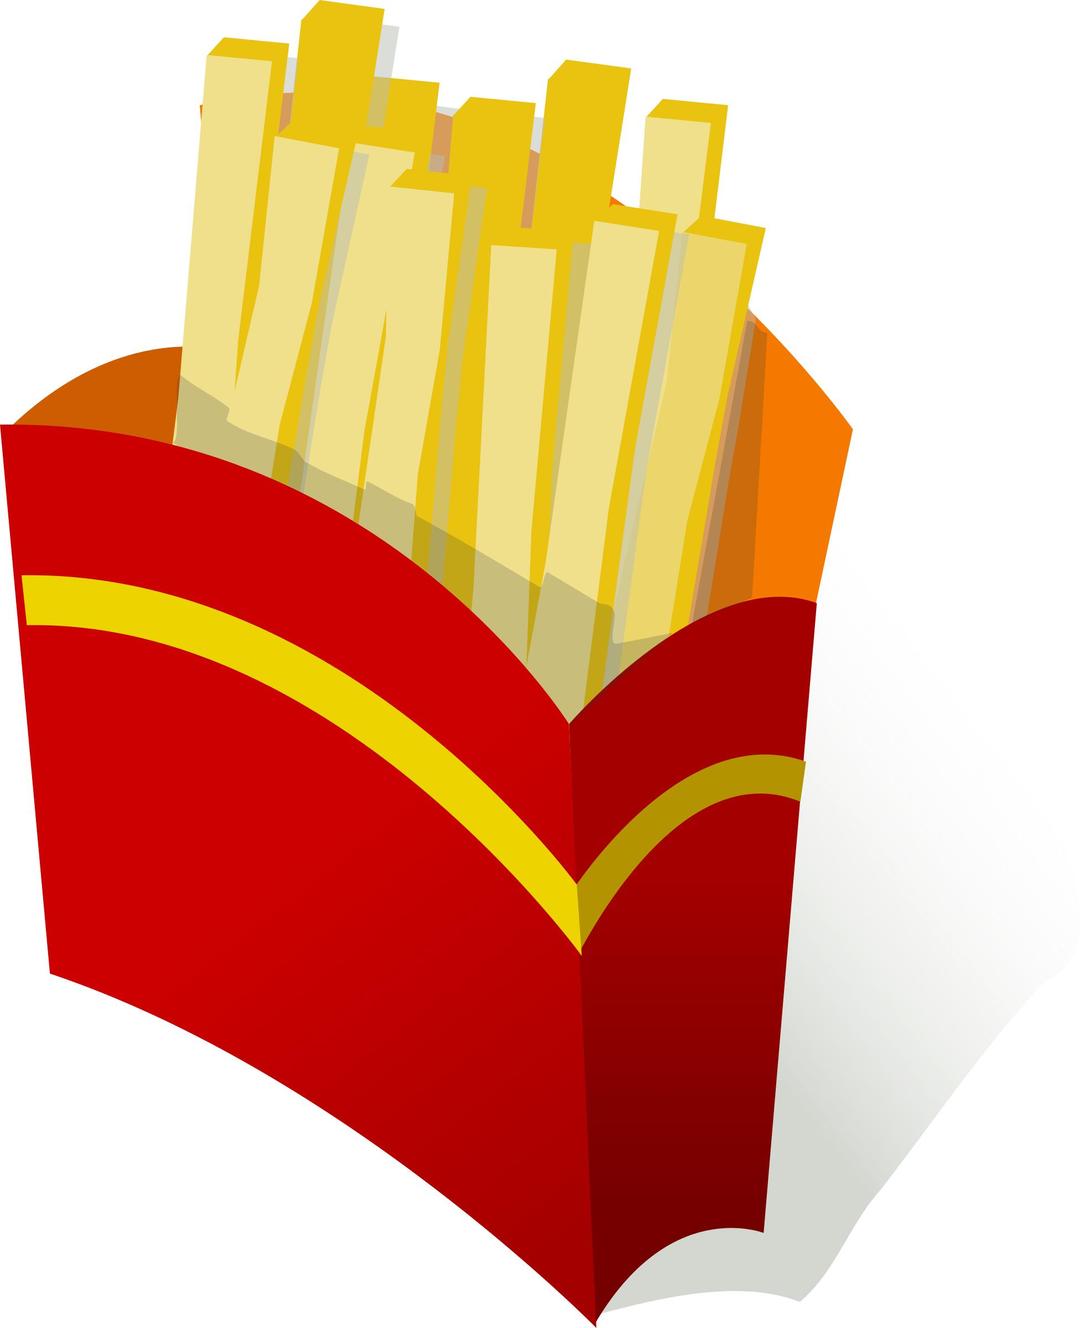 pommes frites / french fries png transparent